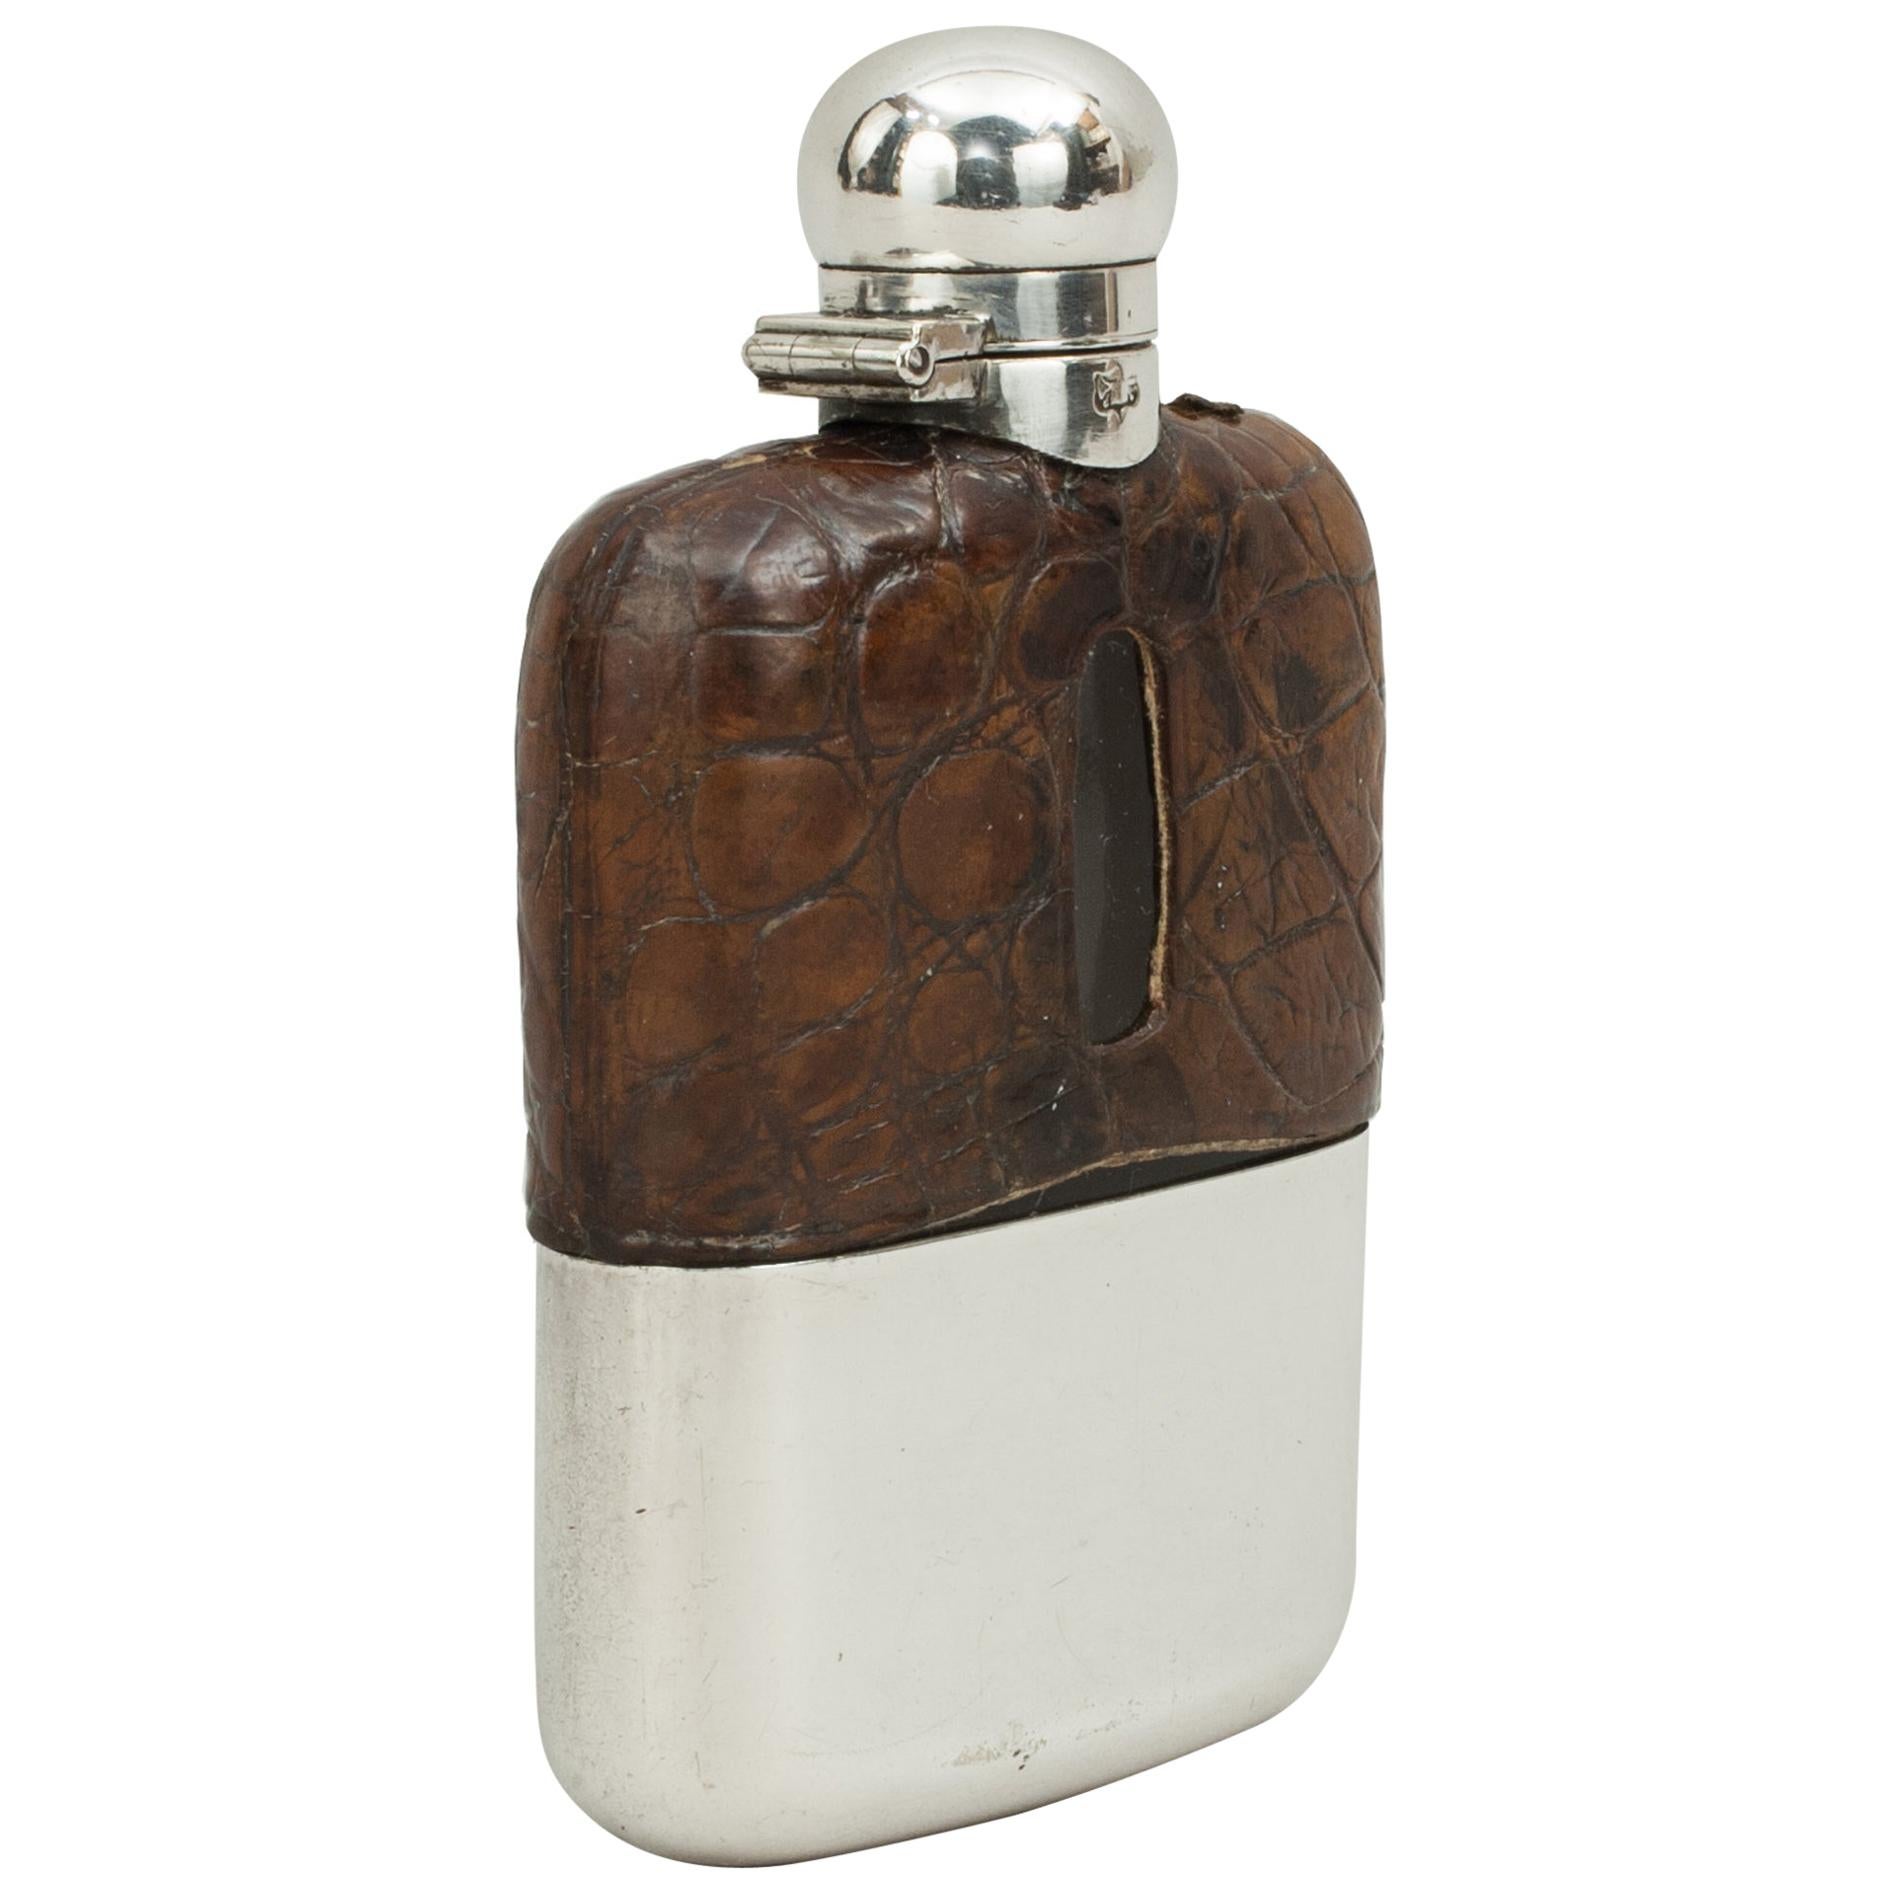 Vintage James Dixon Silver Hip Flask with Leather Cover